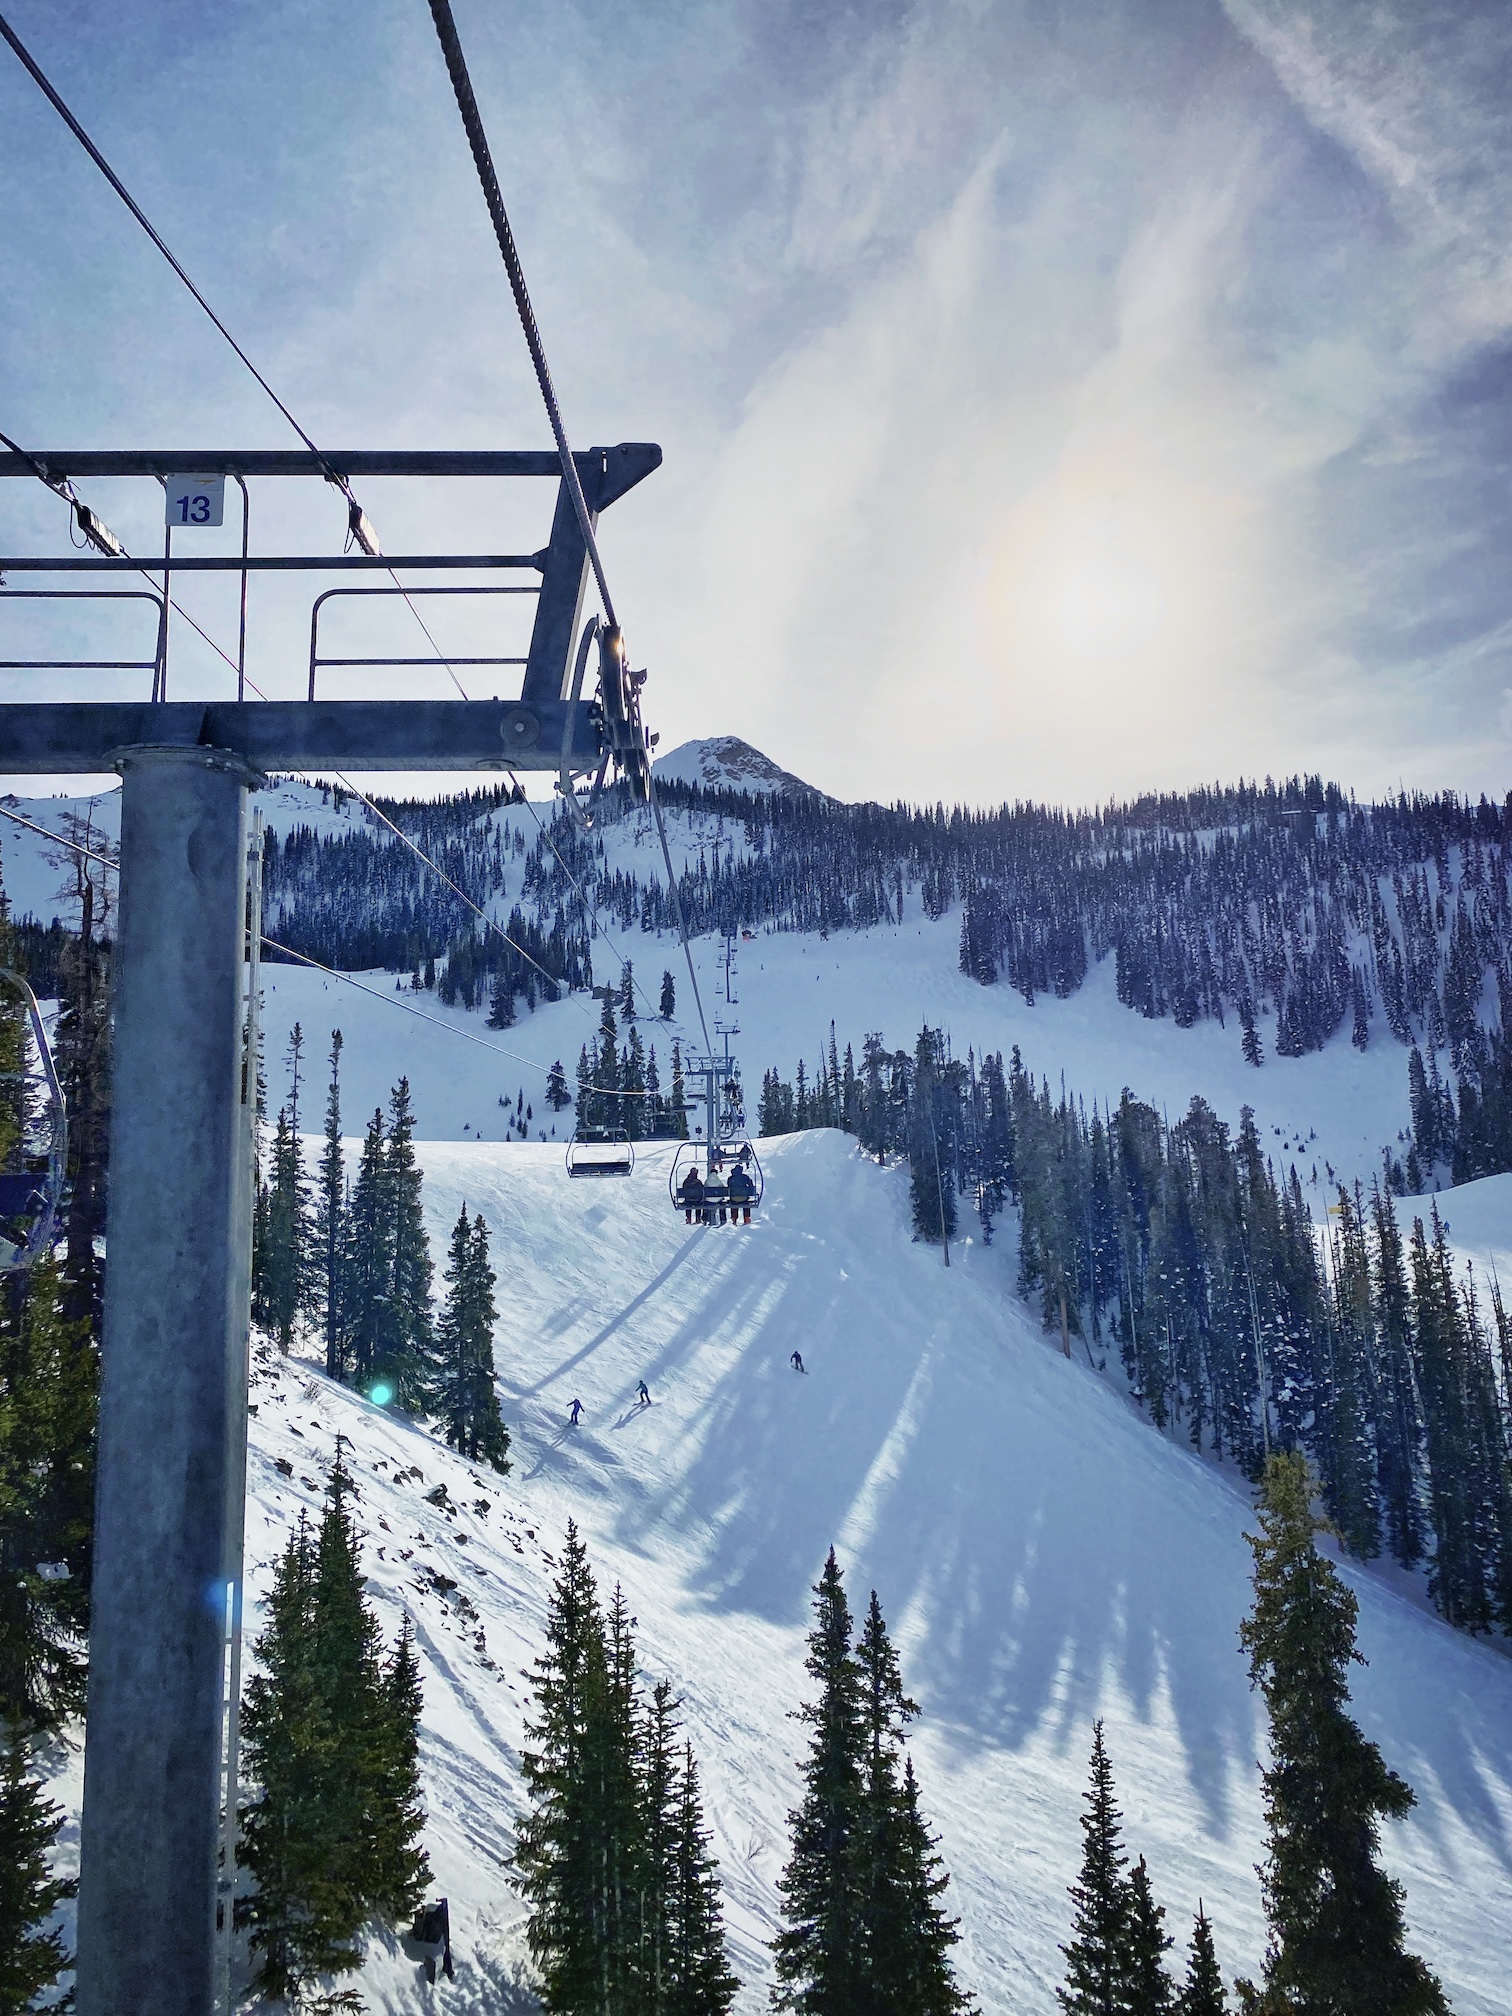 The tower on a ski lift. Paradise Lift at Crested Butte serves an intermediate level bowl.